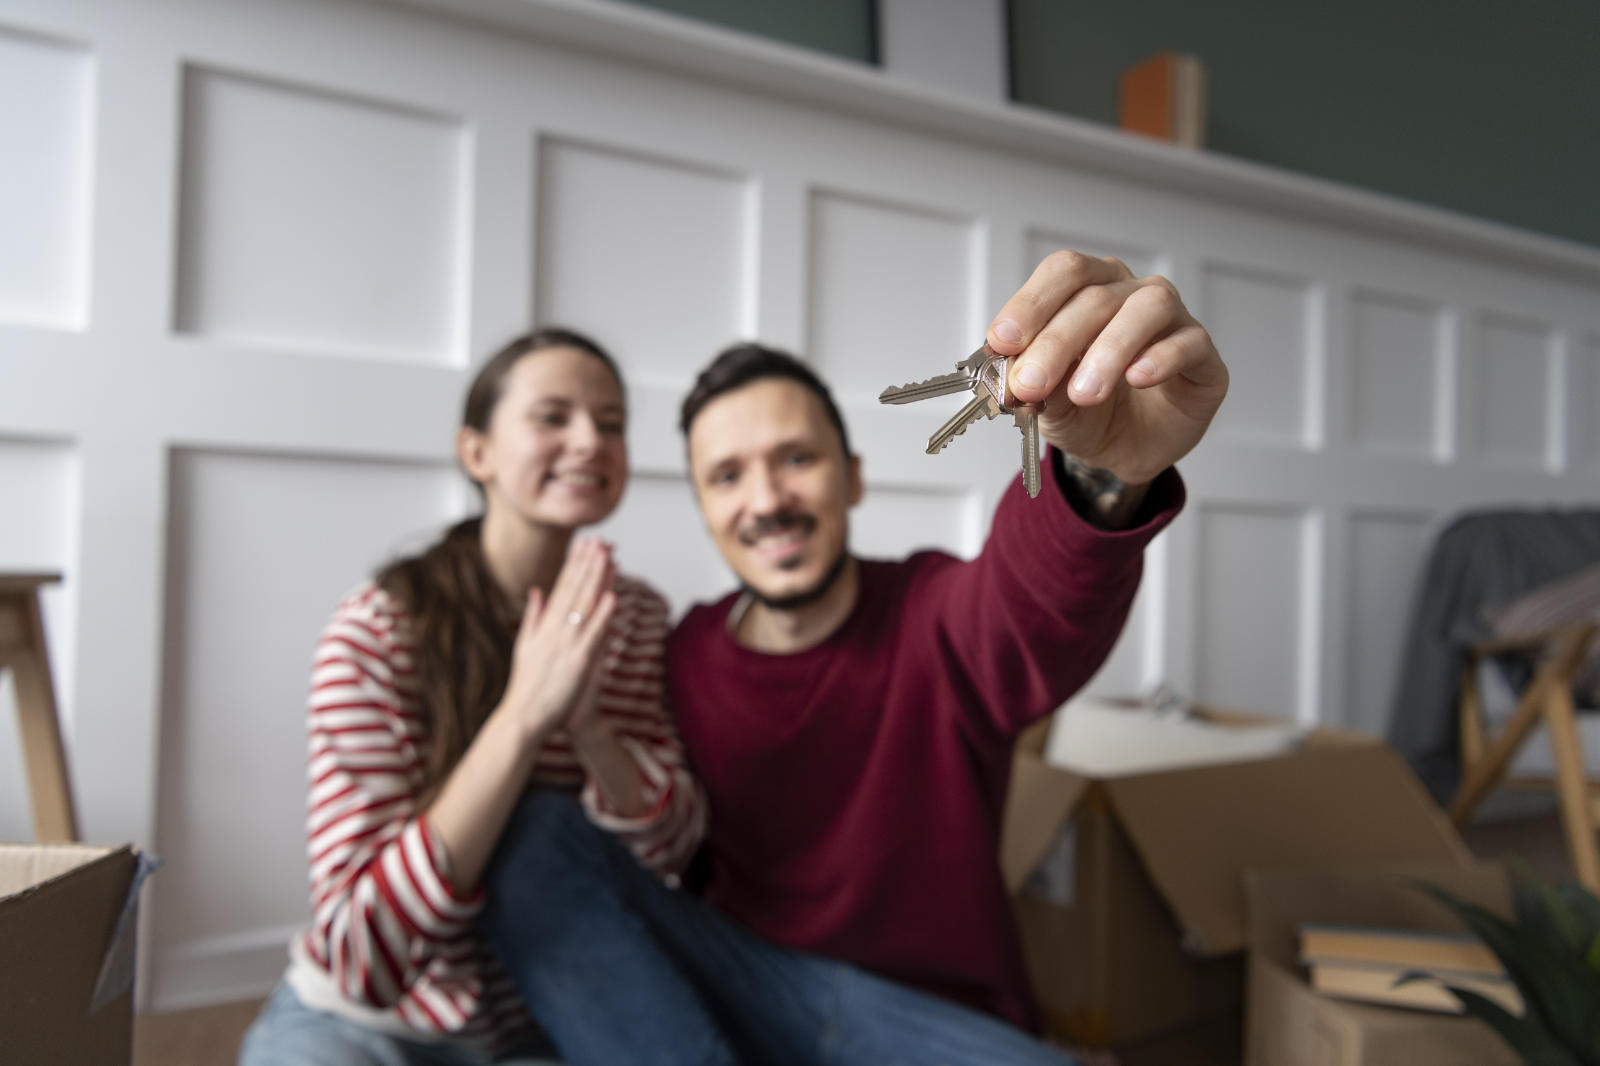 Benefits of self storage during home moving